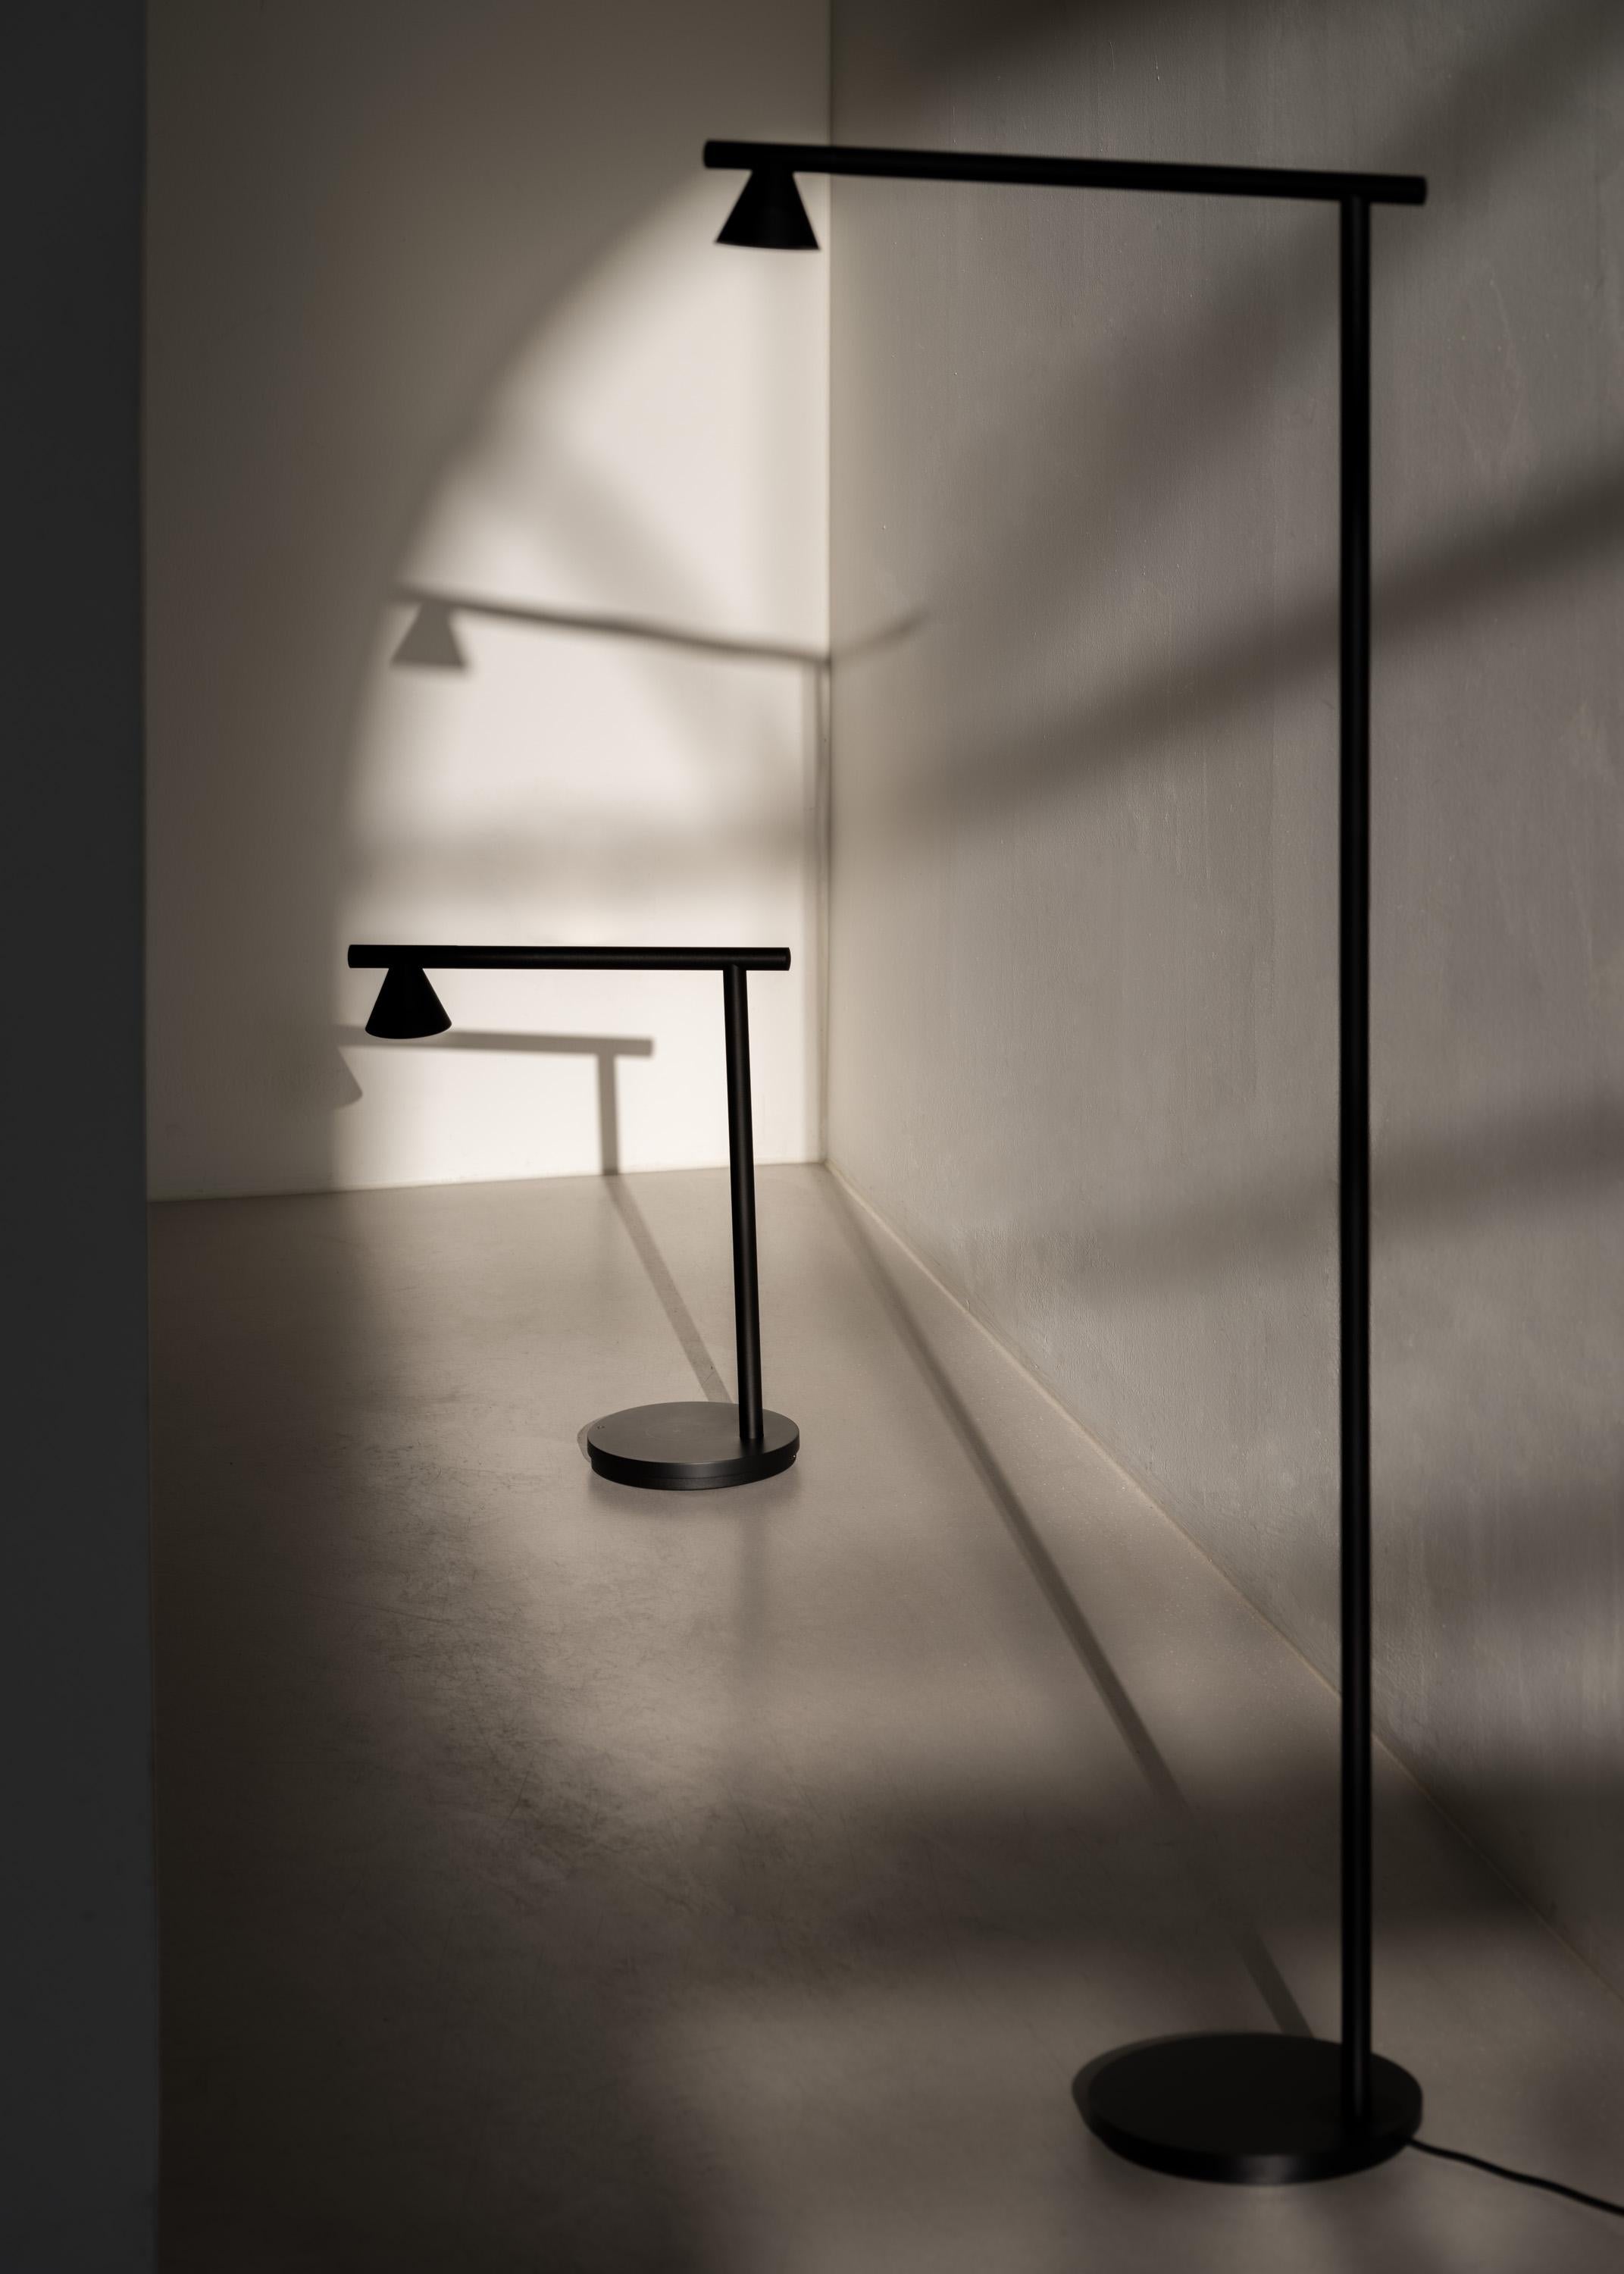 Probe Jr desk lamp by AGO lighting x big-game
UL Listed

Material: Aluminum, ABS
Integrated LED (COB), DC 3 W

Dimensions: H 40 cm x W 34 cm x D. 16 cm

AGO is a Korean design studio specialized in lighting. AGO is based in the area of